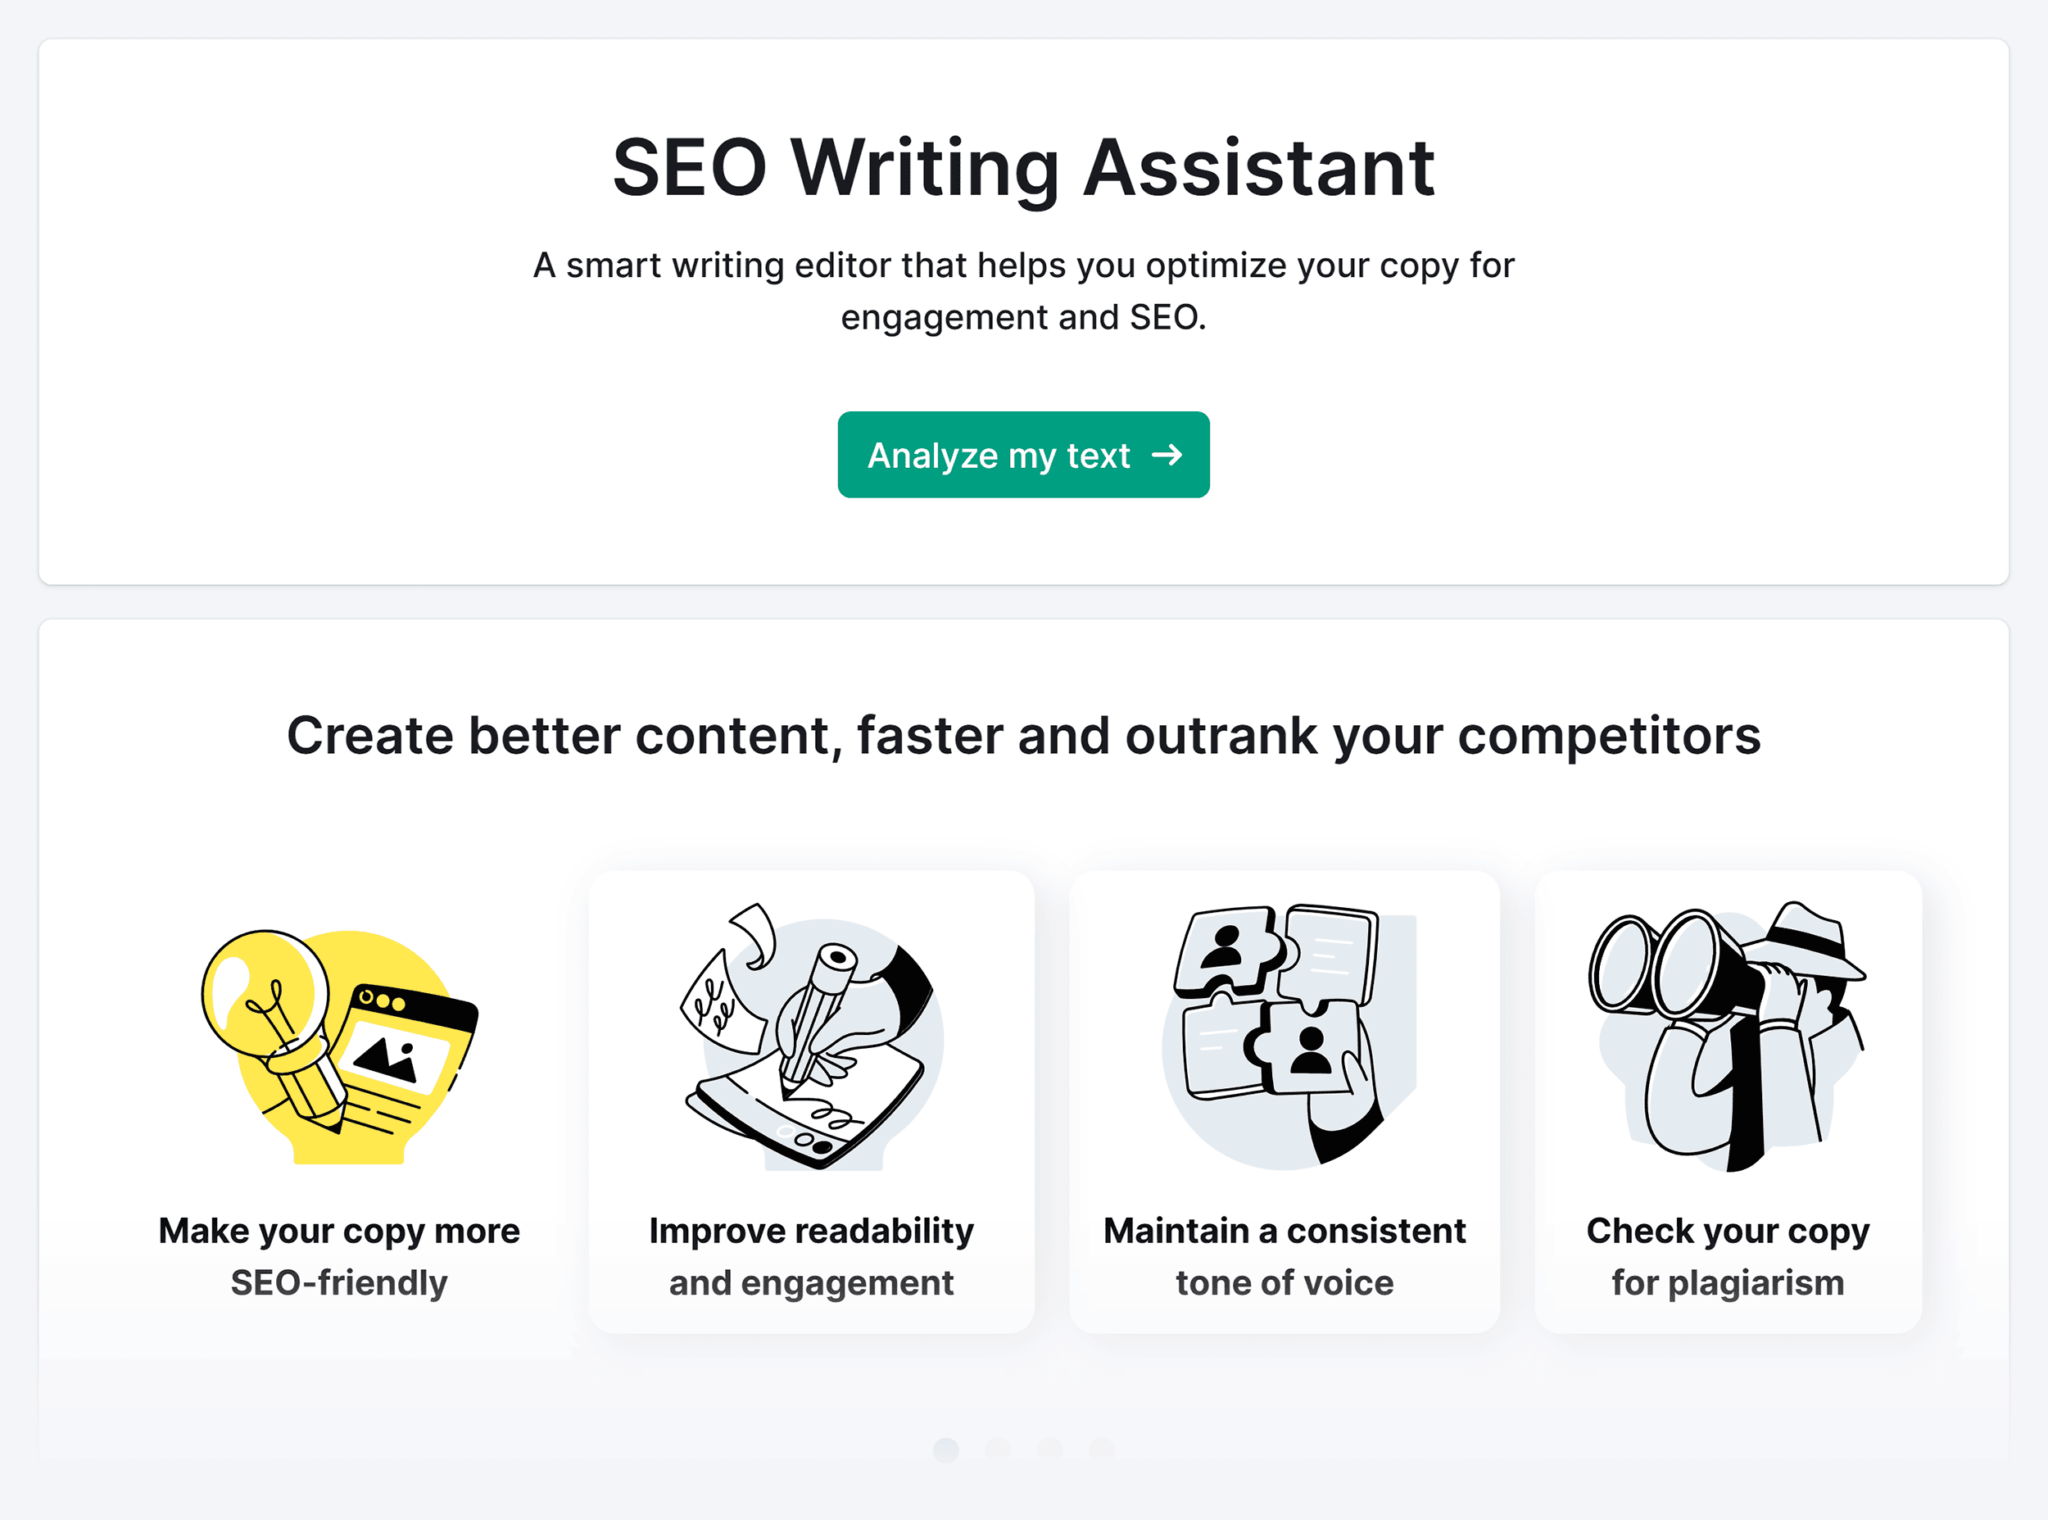 semrush-seo-writing-assistant 29 Top Digital Marketing Tools for Every Budget